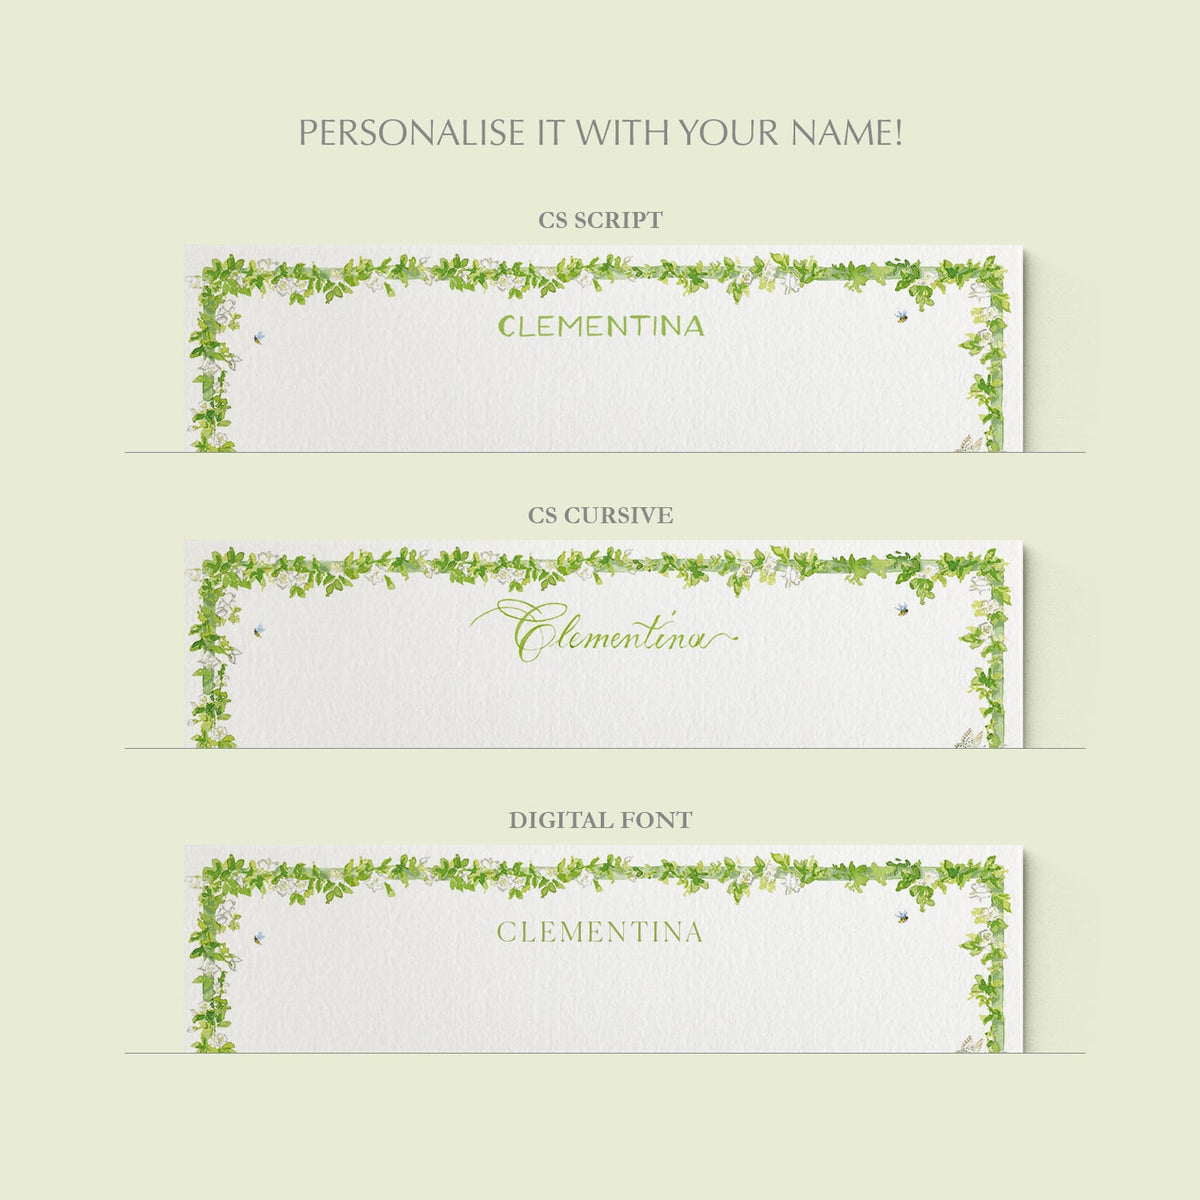 Enchanted Garden Stationery Cards, Personalized Set of 50